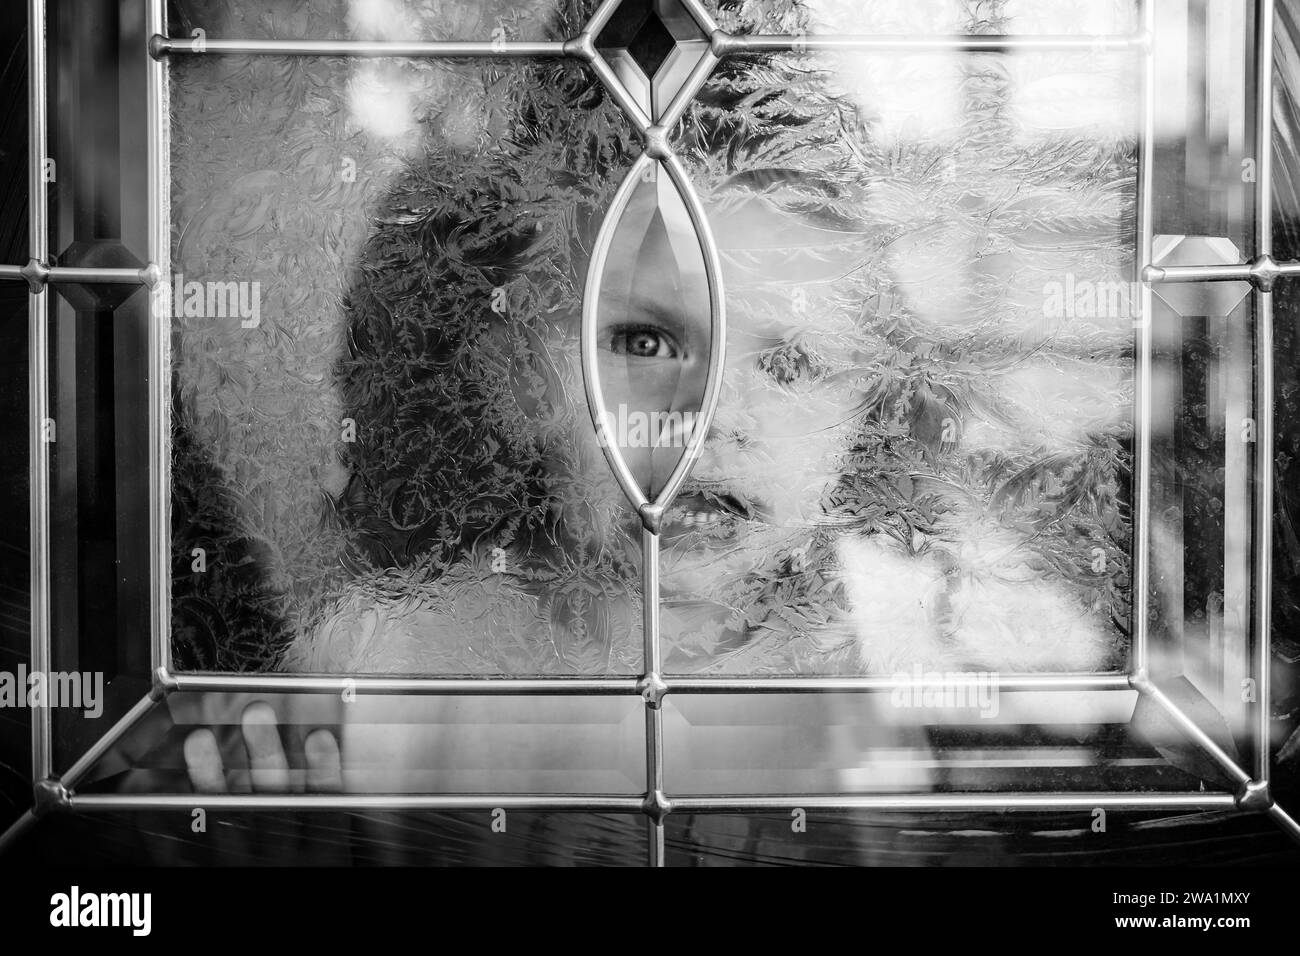 Child looking out through frosted glass window Stock Photo